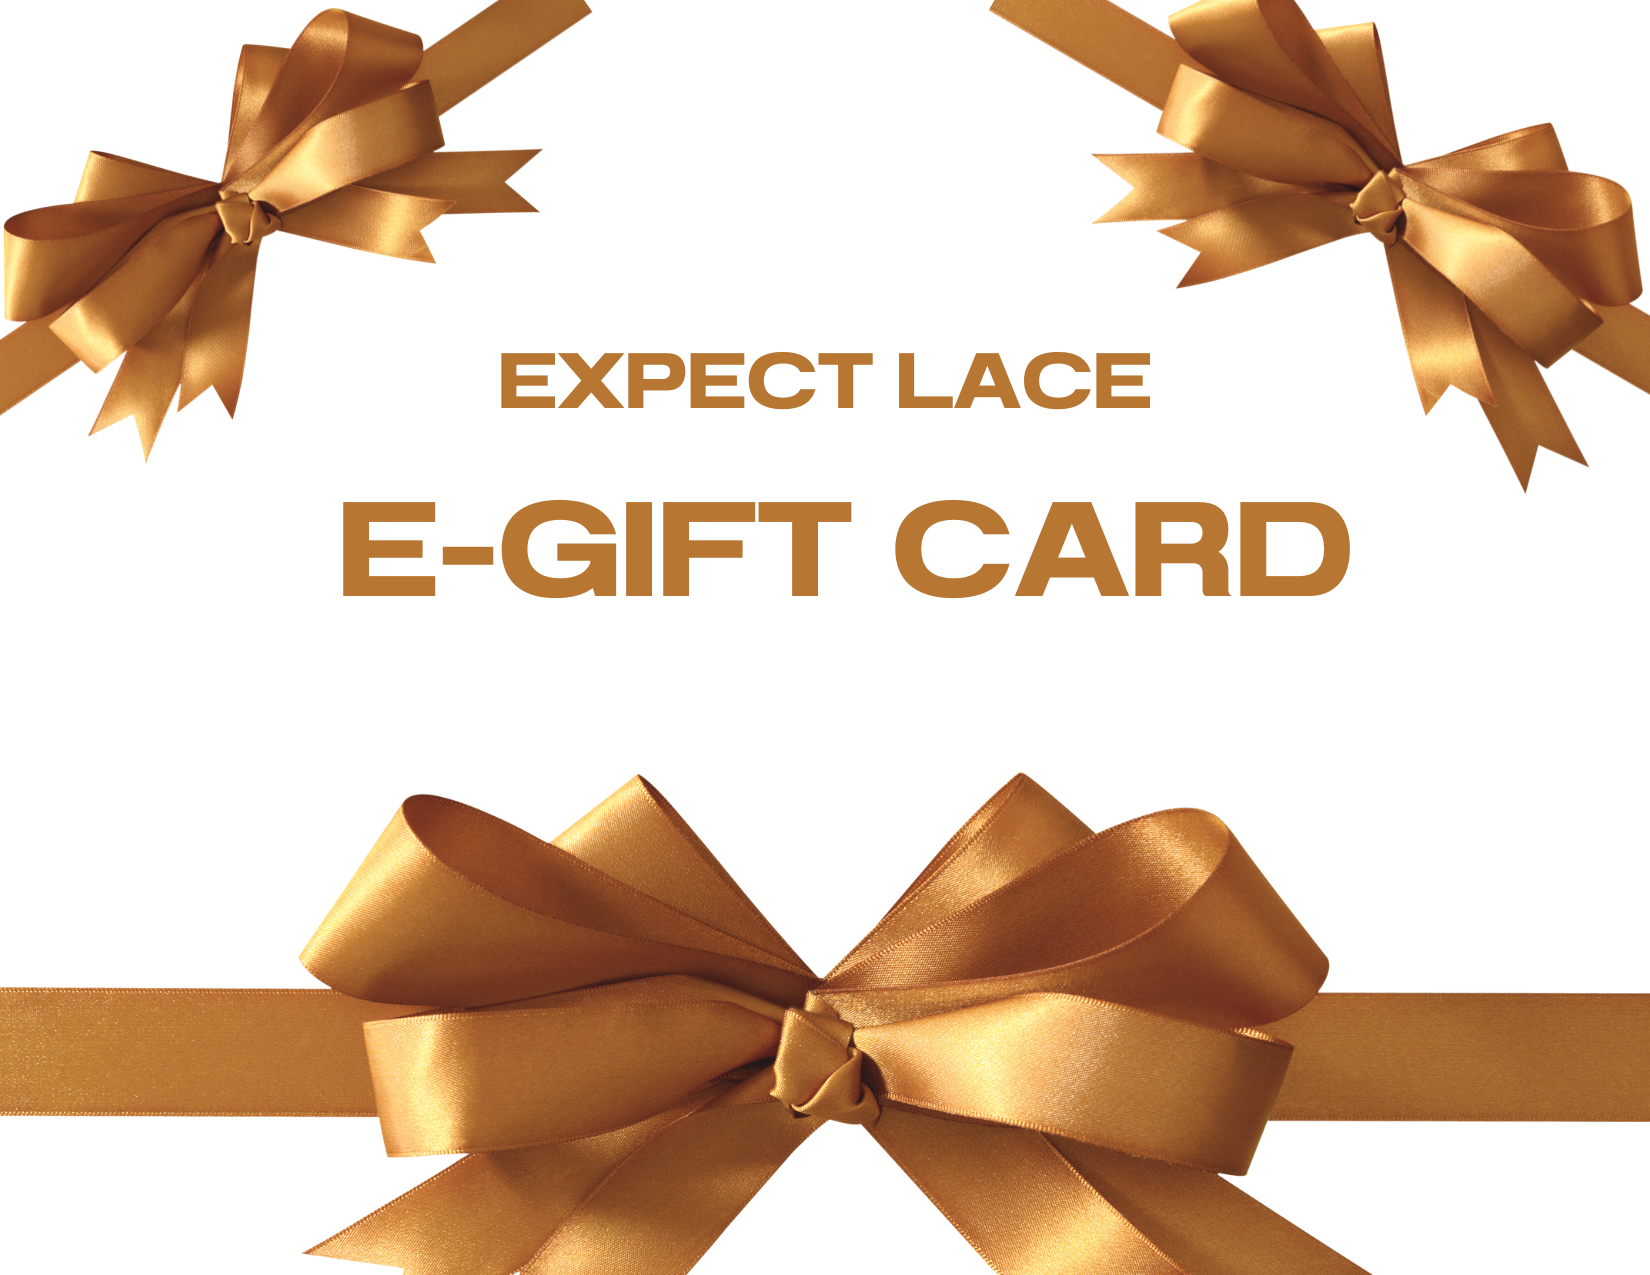 EXPECT LACE GIFT CARD